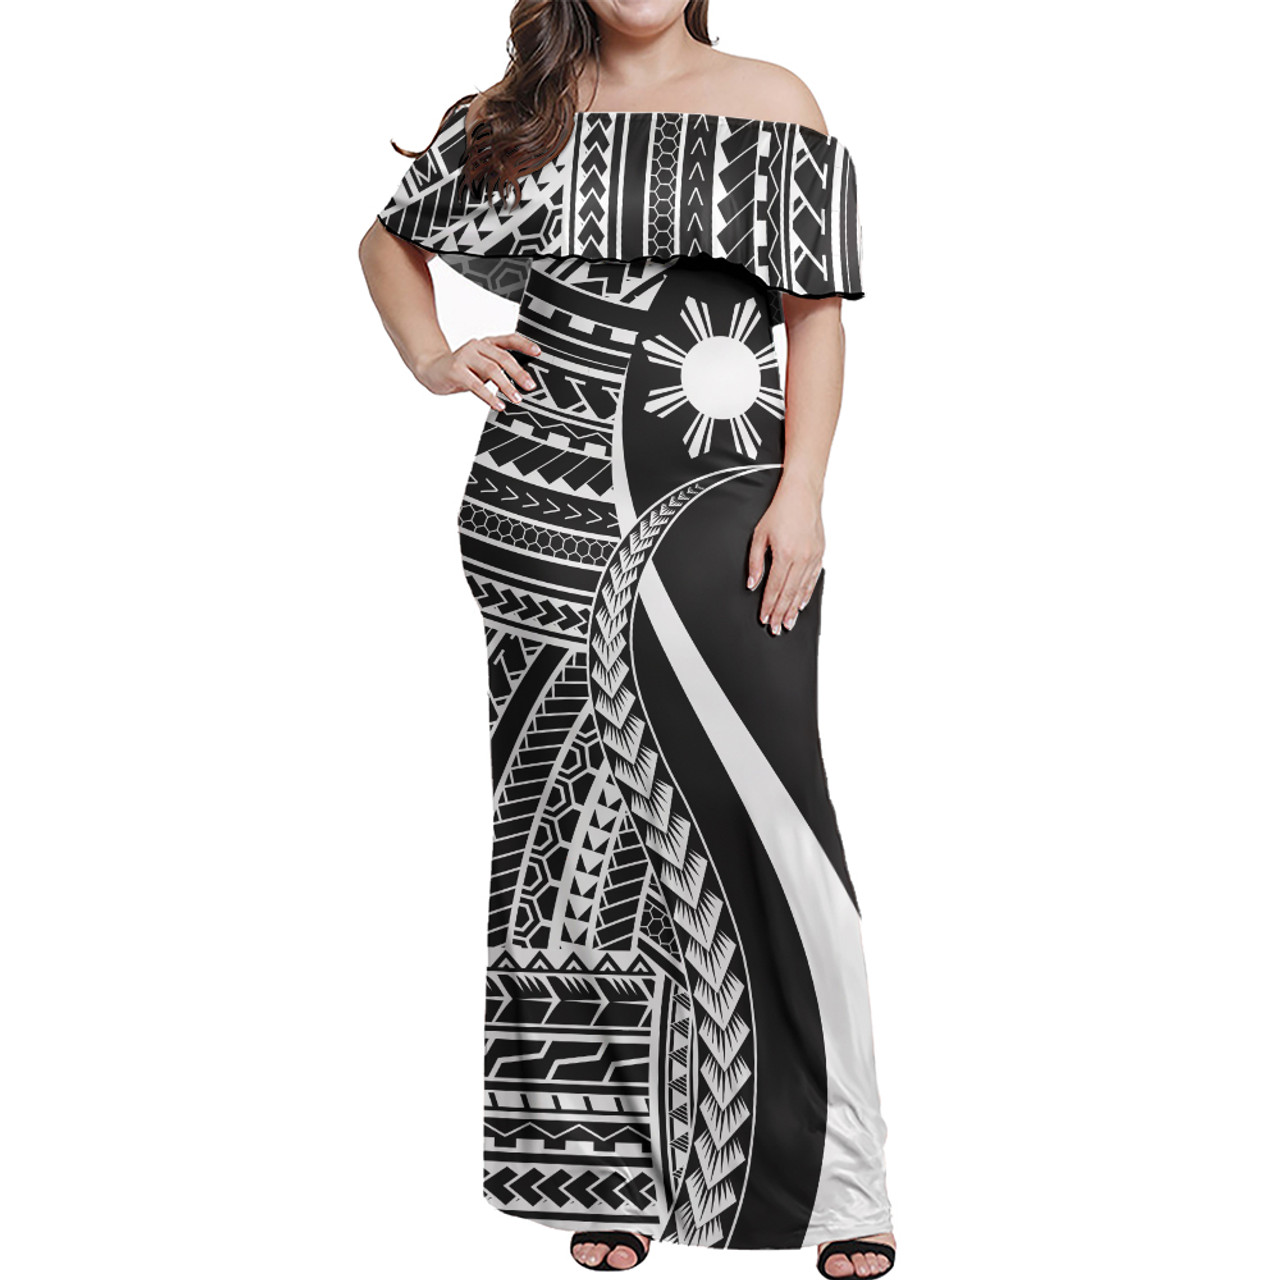 Philippines Combo Dress And Shirt - Polynesian Tentacle Tribal Pattern White